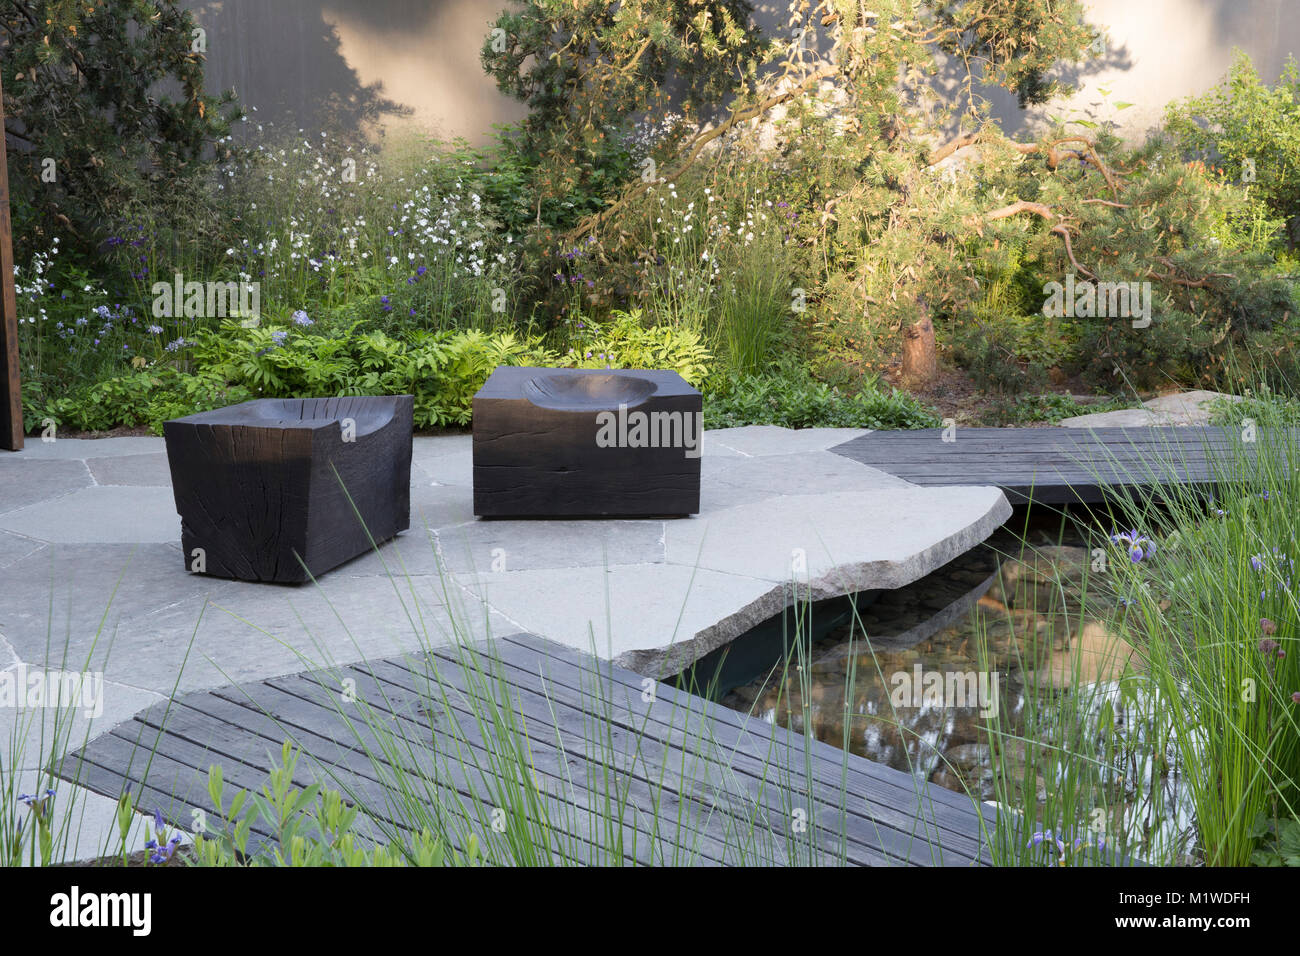 modern garden with stone paving paved patio area wooden decking small pond Chelsea Flower Show UK wooden walkway over pool, charred wooden cube seat Stock Photo